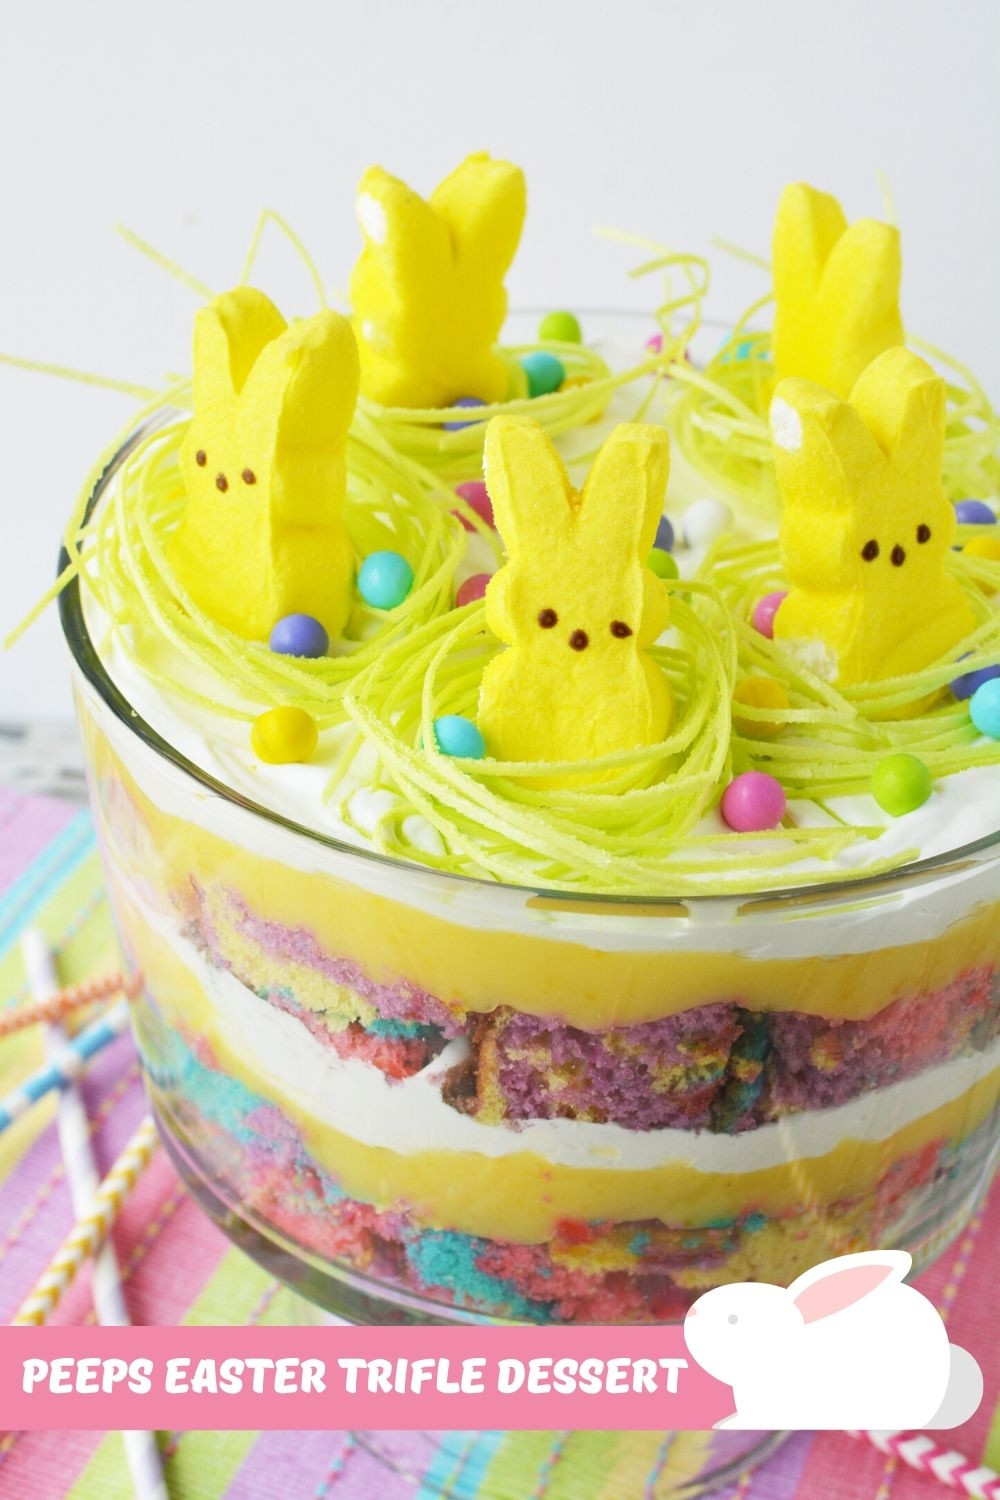 Easy Easter Desserts Recipes With Pictures
 Cute & Easy The Easter Trifle Dessert Recipe You Need To Make